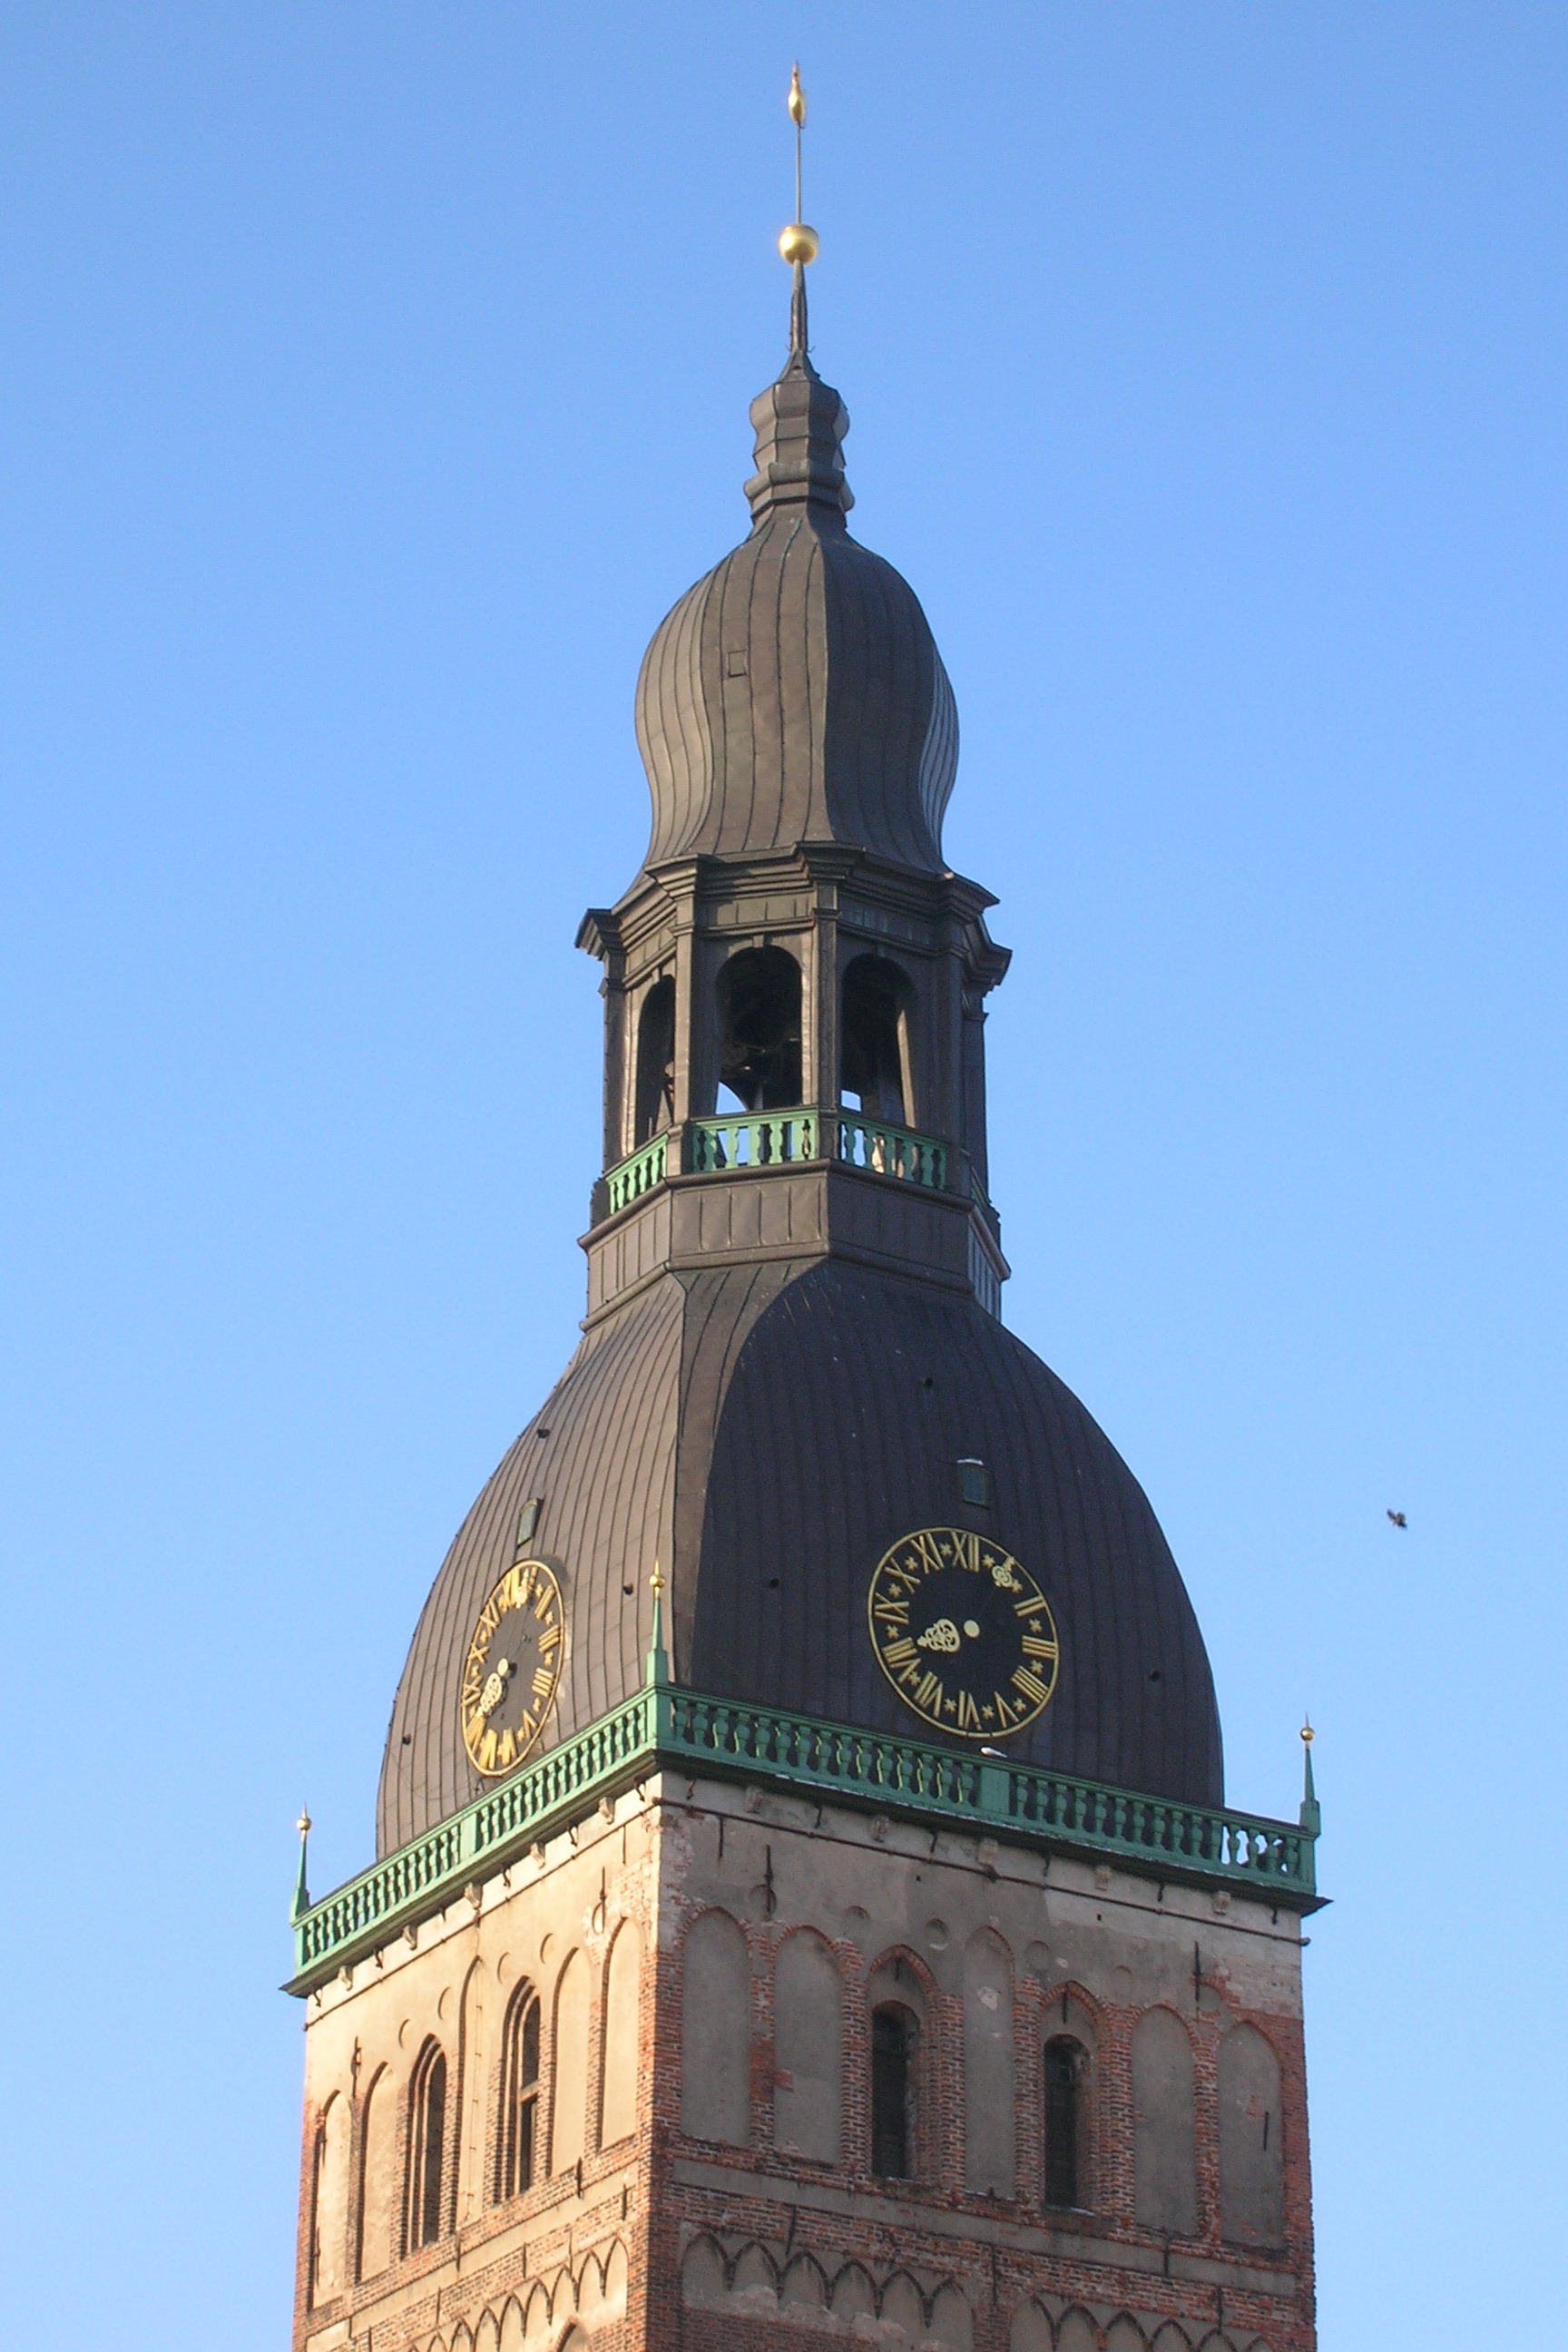 File:Riga - Dome Cathedral - Tower.jpg - Wikimedia Commons